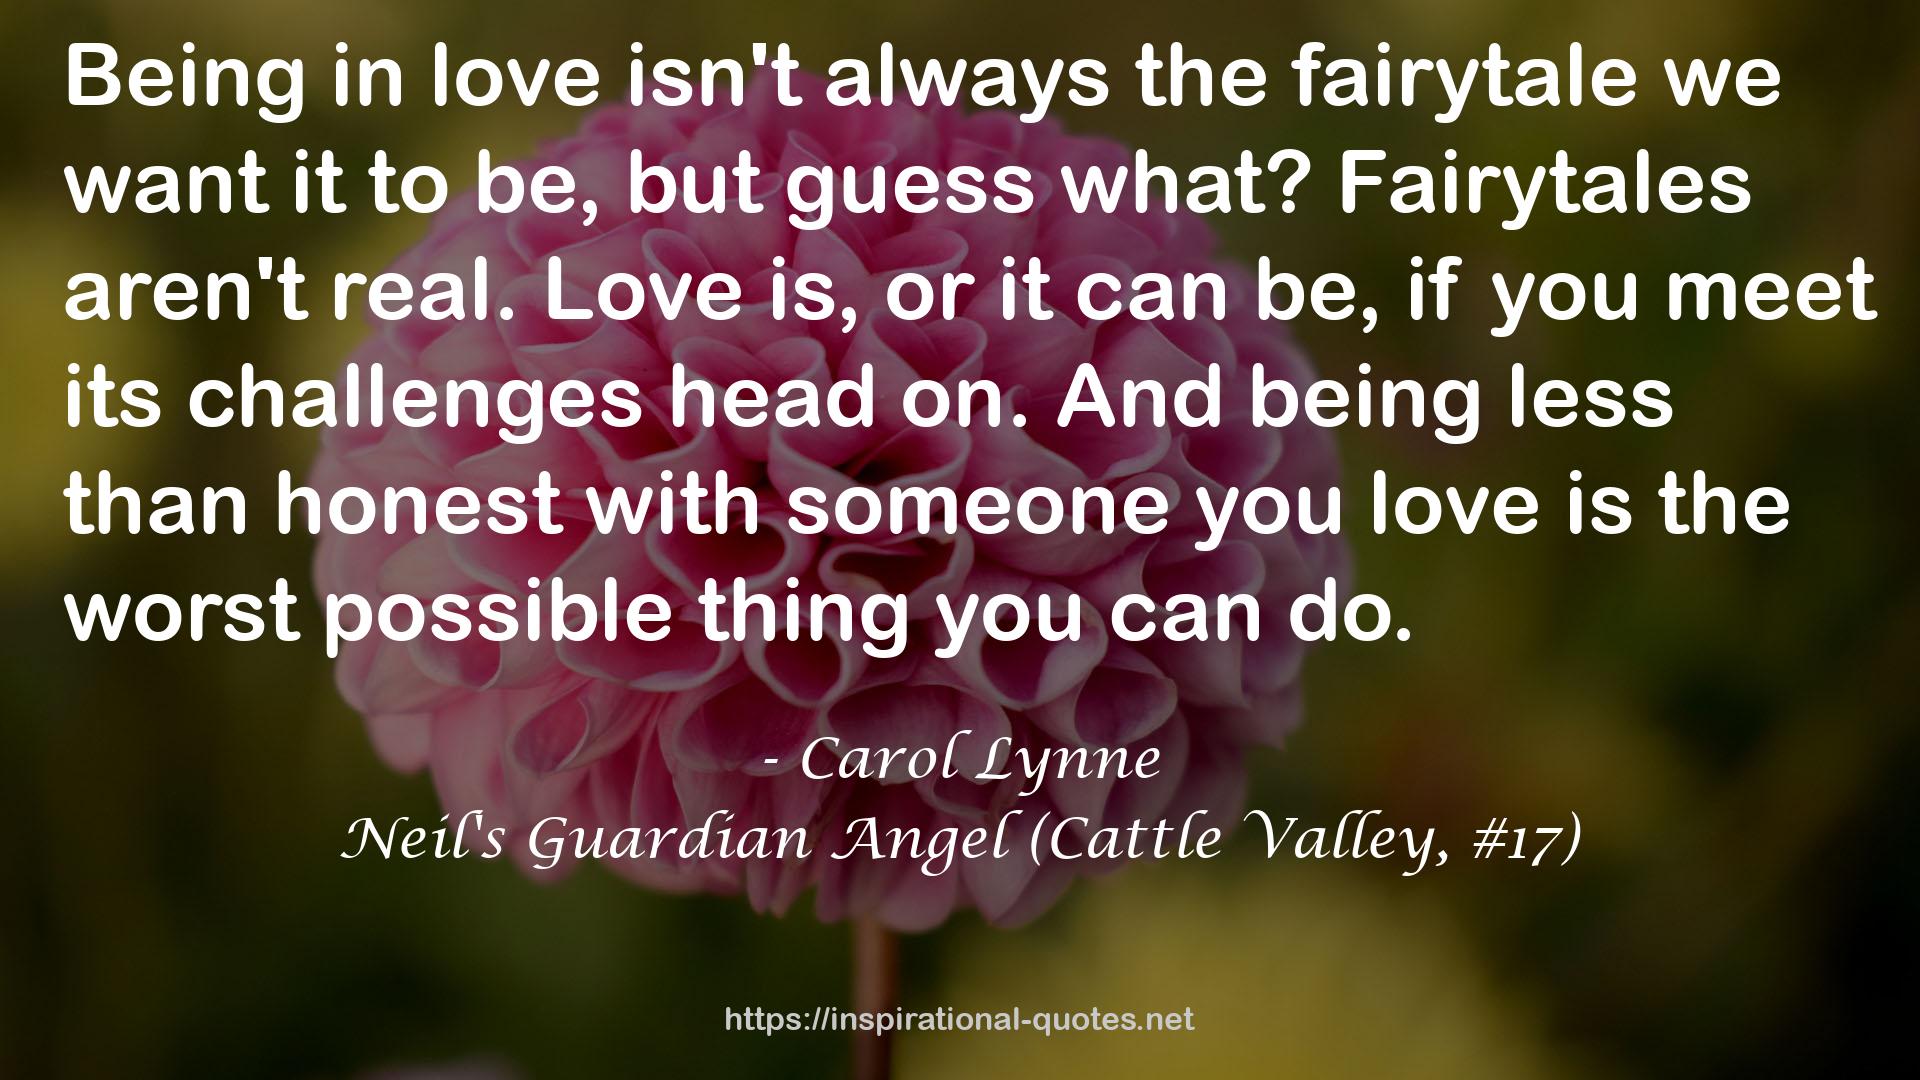 Neil's Guardian Angel (Cattle Valley, #17) QUOTES